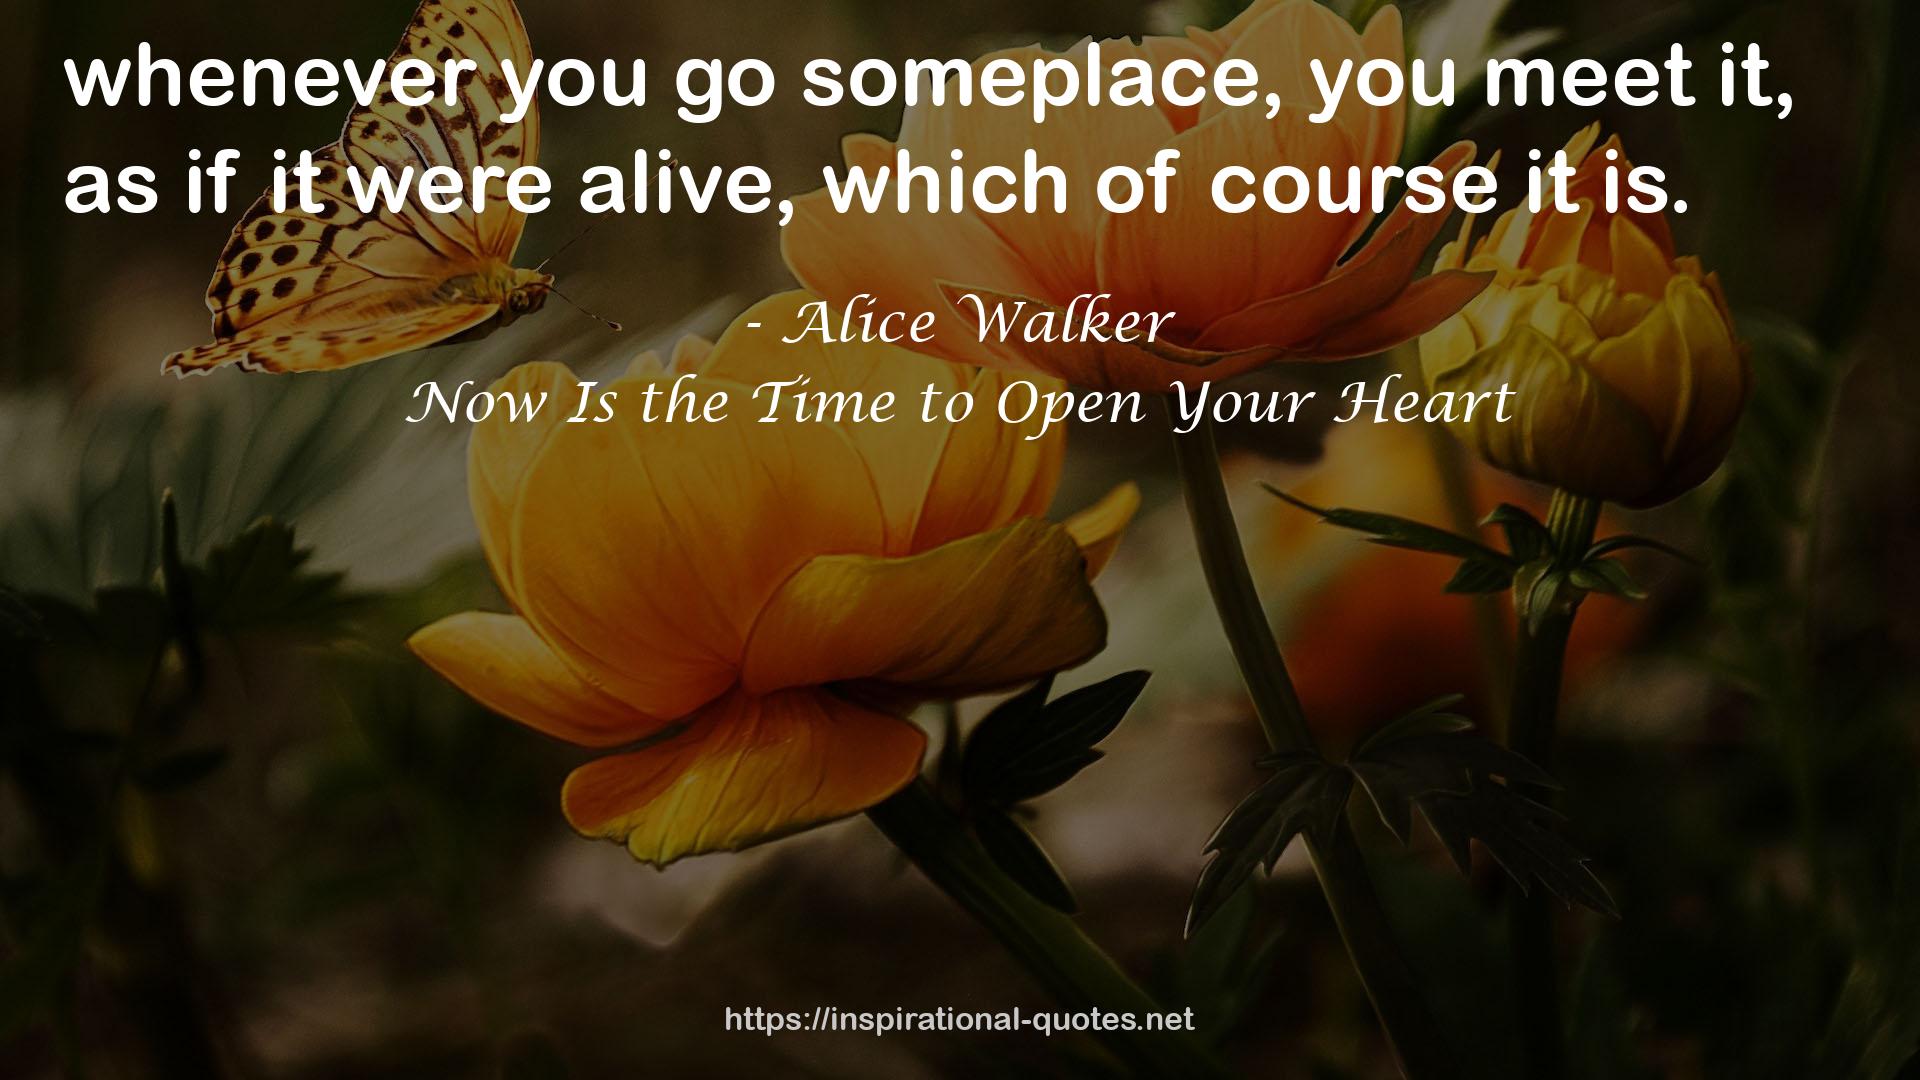 Now Is the Time to Open Your Heart QUOTES